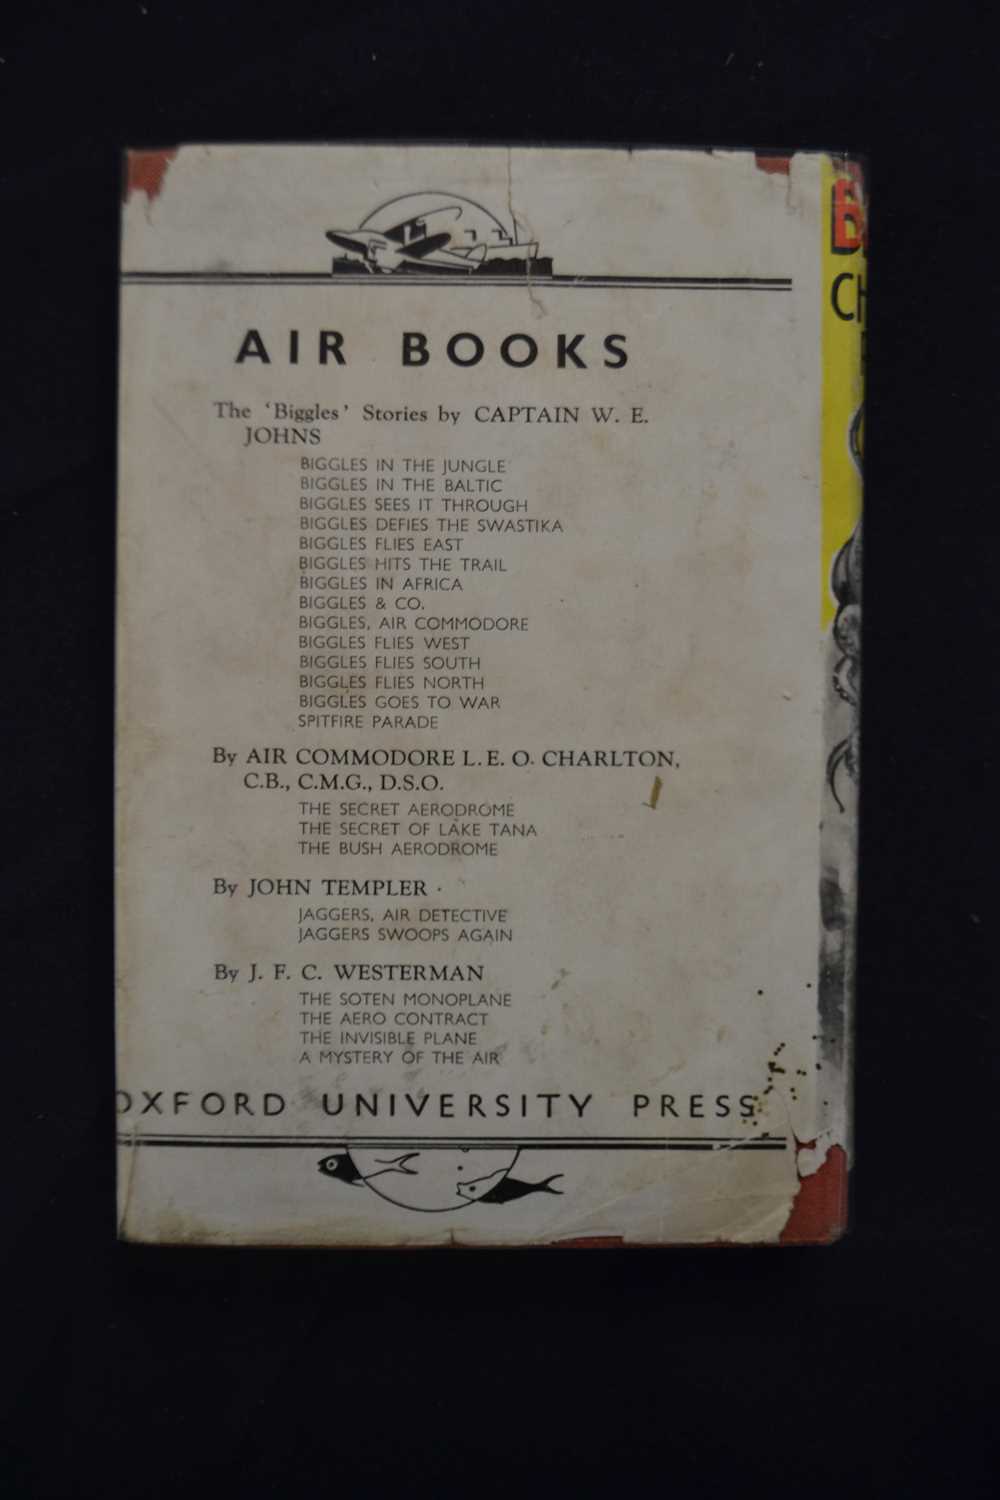 WE JOHNS: BIGGLES - CHARTER PILOT, London, OUP, 1943, First edition with dustjacket (tatty) - Image 3 of 5